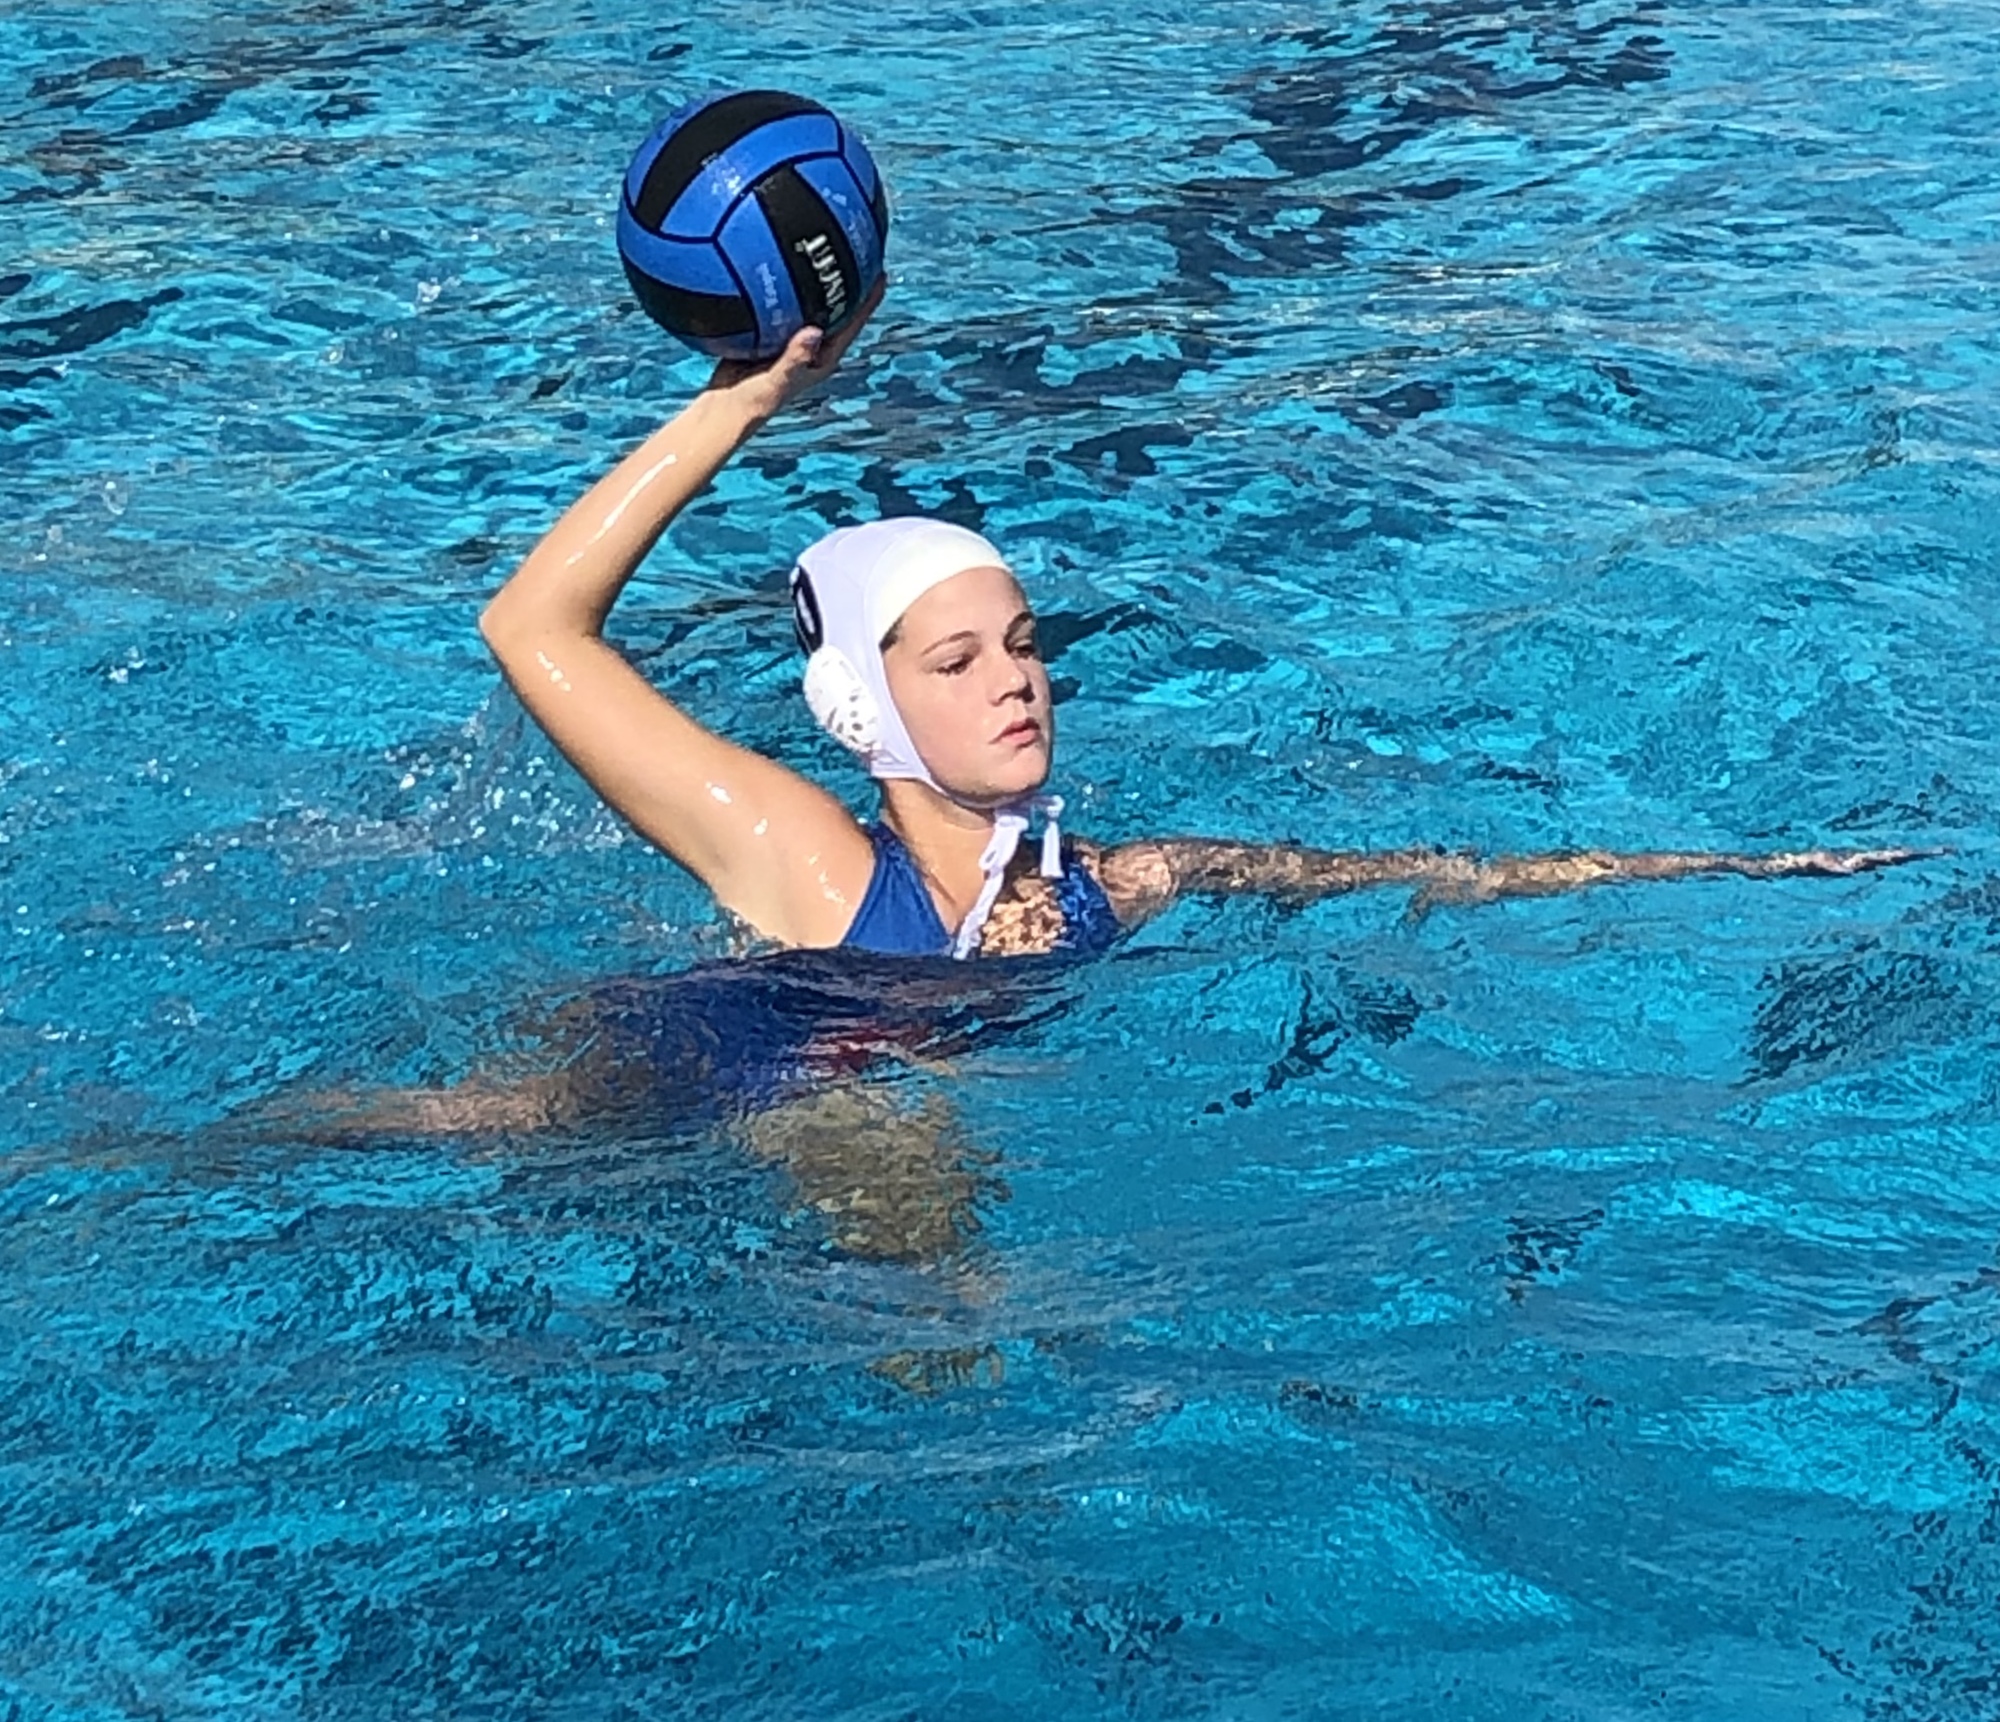 Jamie McHardy takes a shot during a water polo match in Orlando on Jan. 4. Photo courtesy Debbie McHardy.